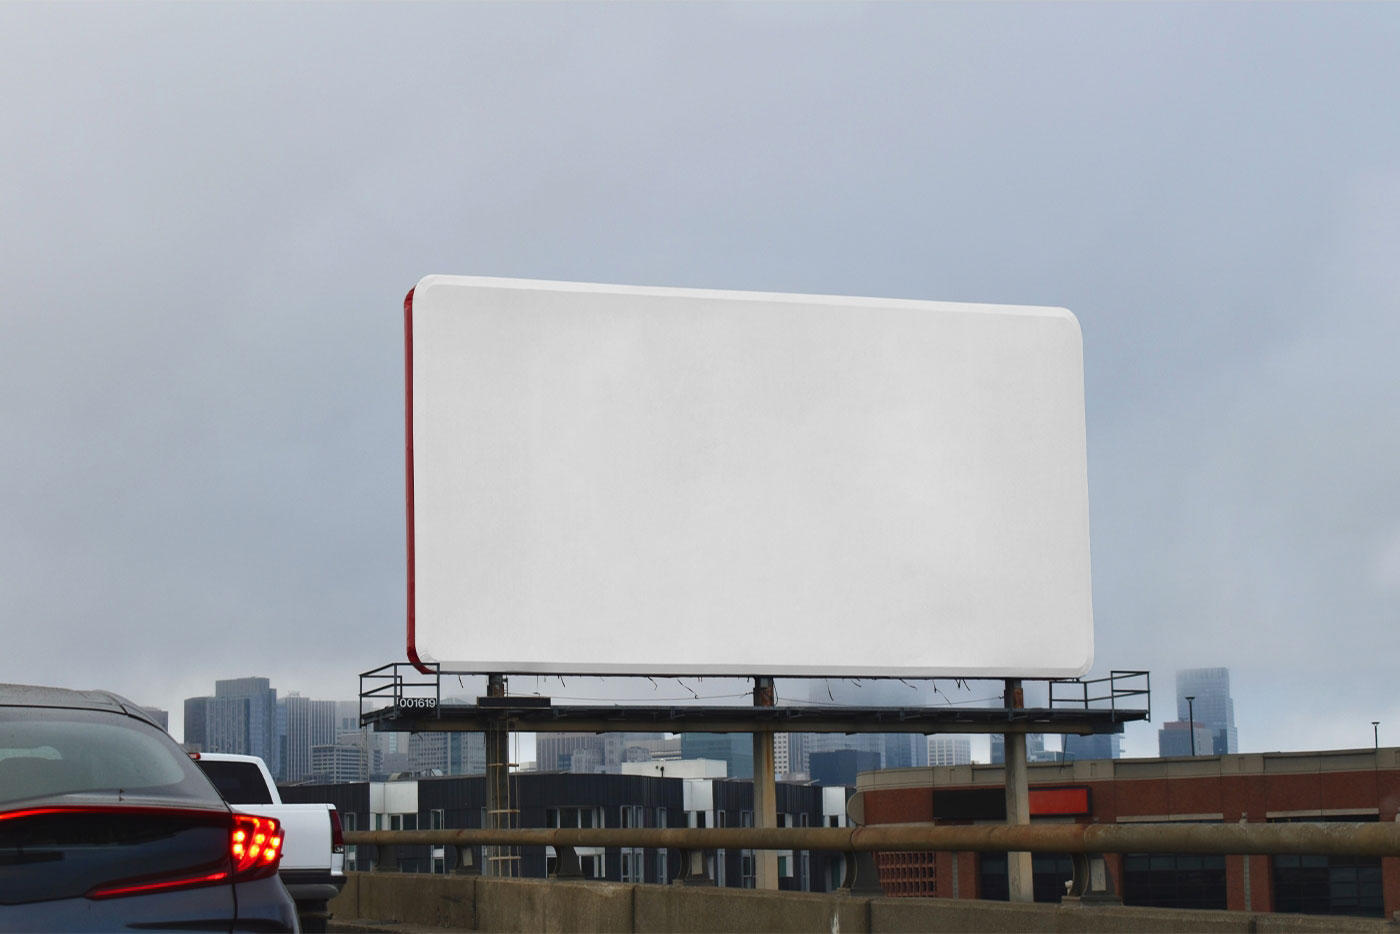 Perspective View of a Big City Billboard Mockup FREE PSD